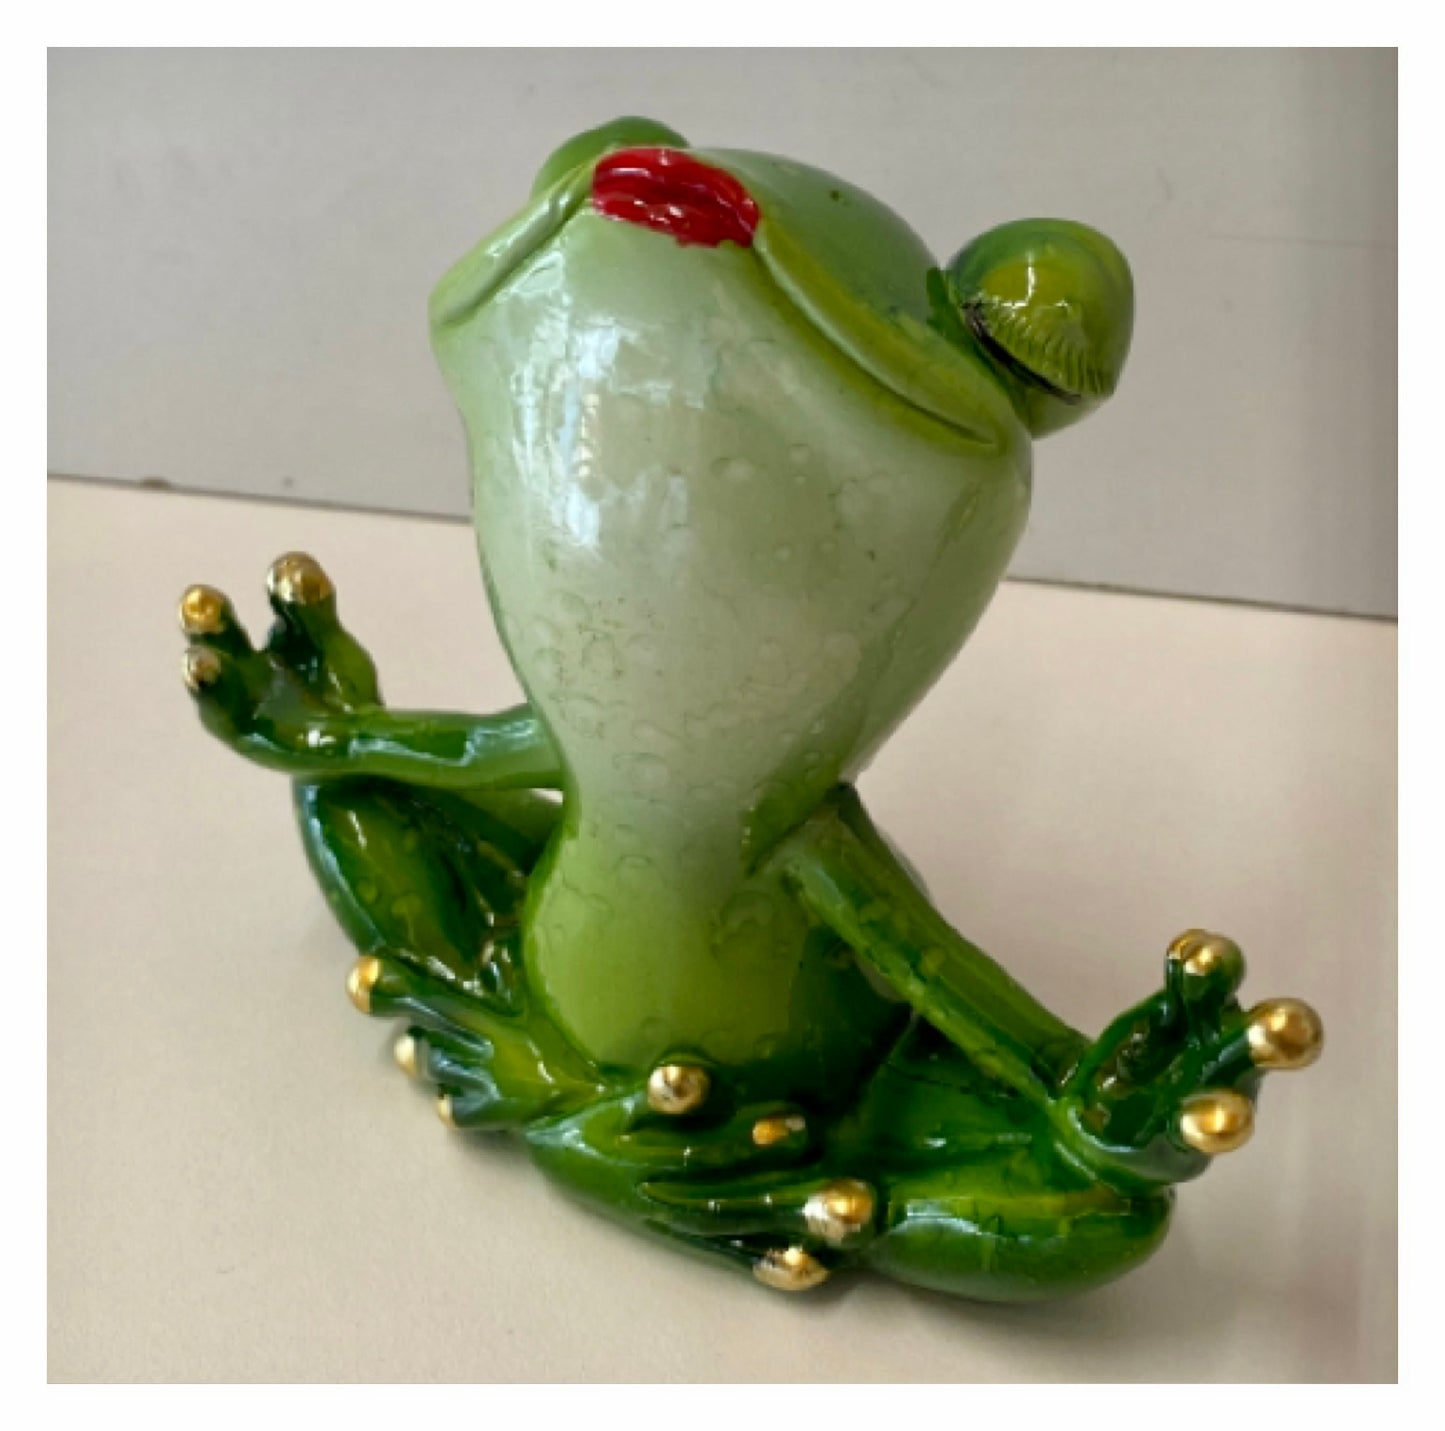 Frog Meditate Zen Yoga Ornament - The Renmy Store Homewares & Gifts 